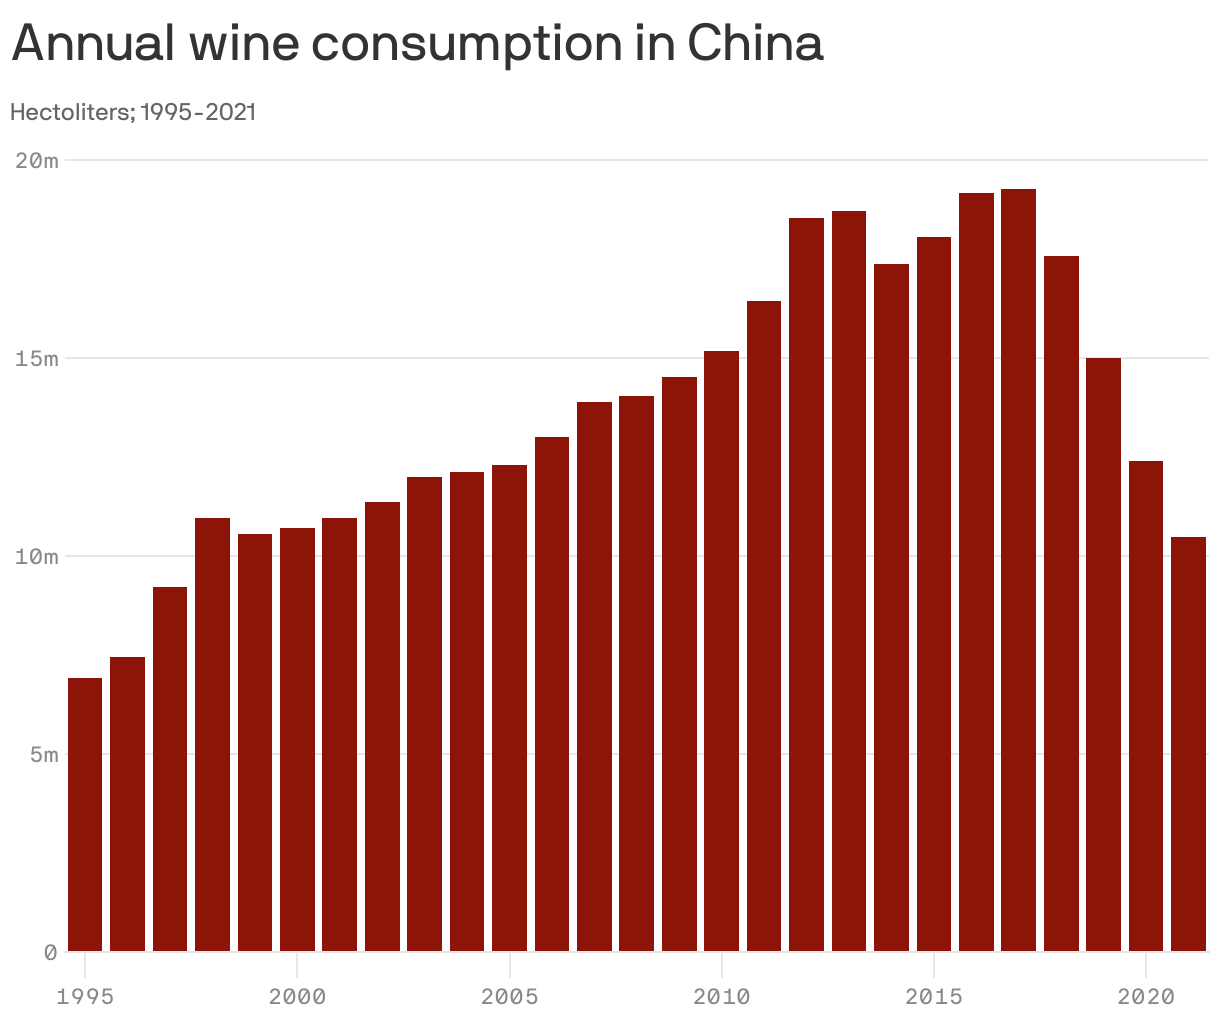 Annual wine consumption in China